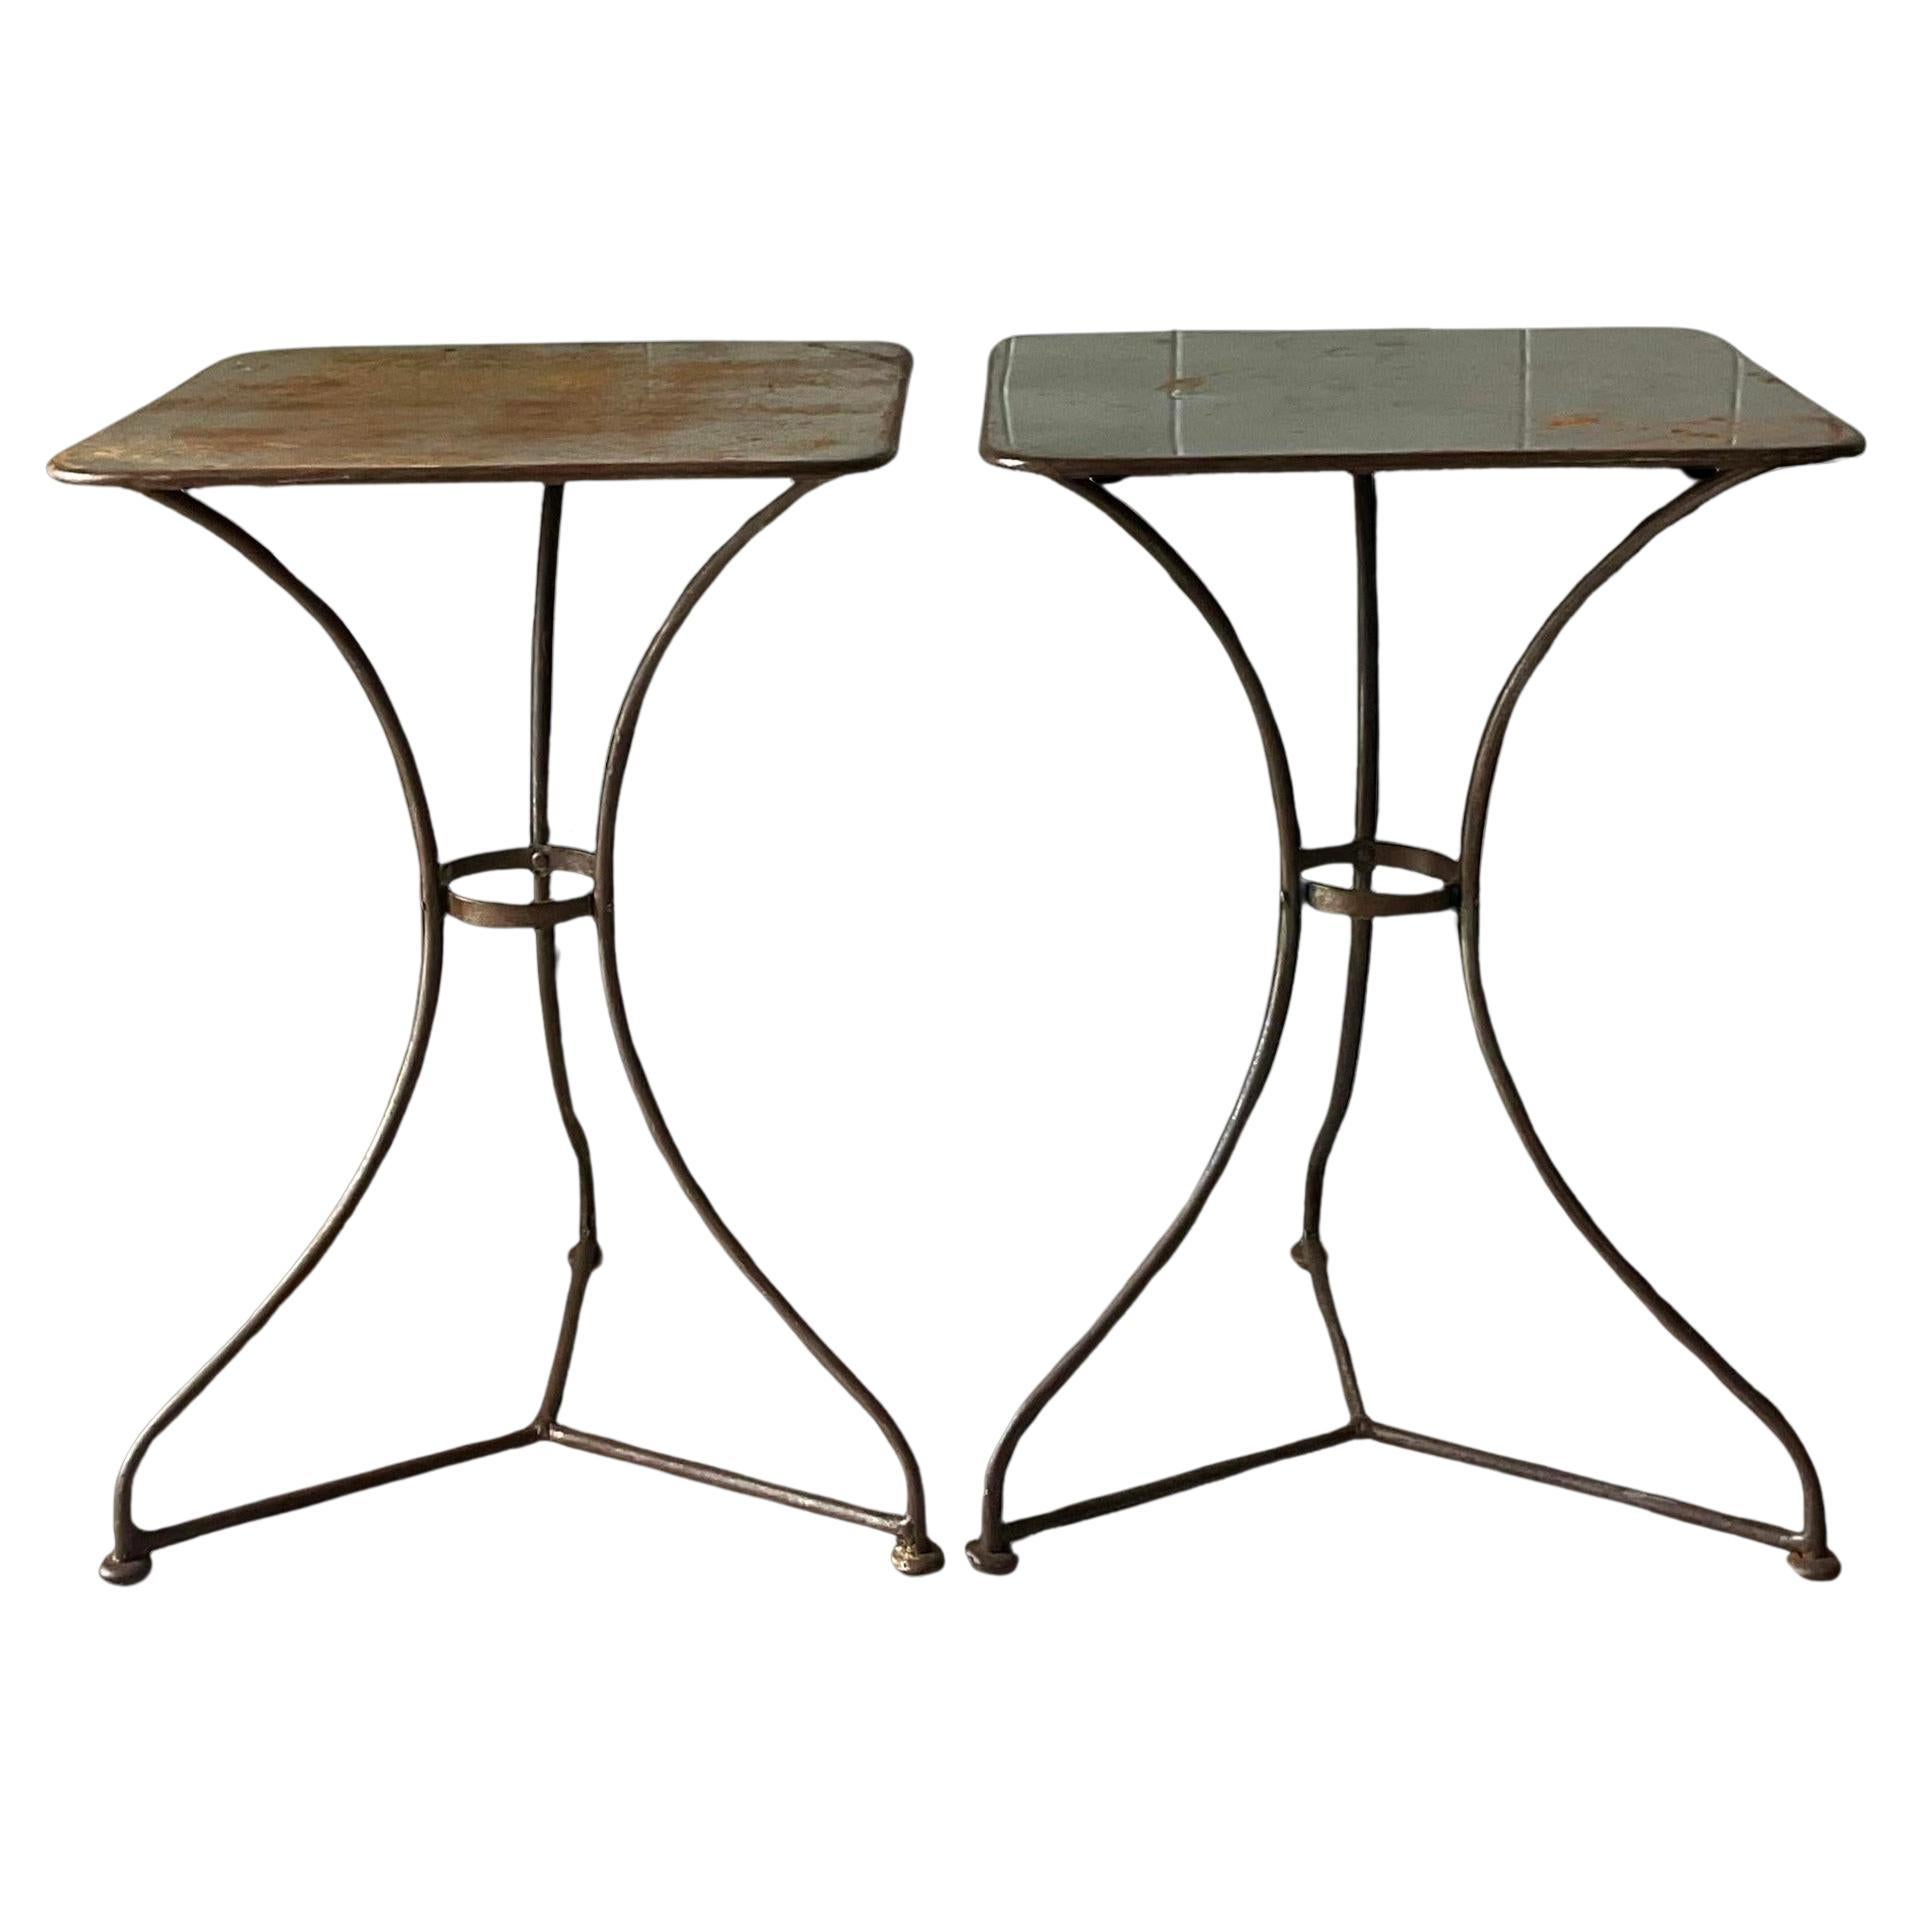 Late 20th Century Vintage Boho Patinated Metal Side Tables - a Pair